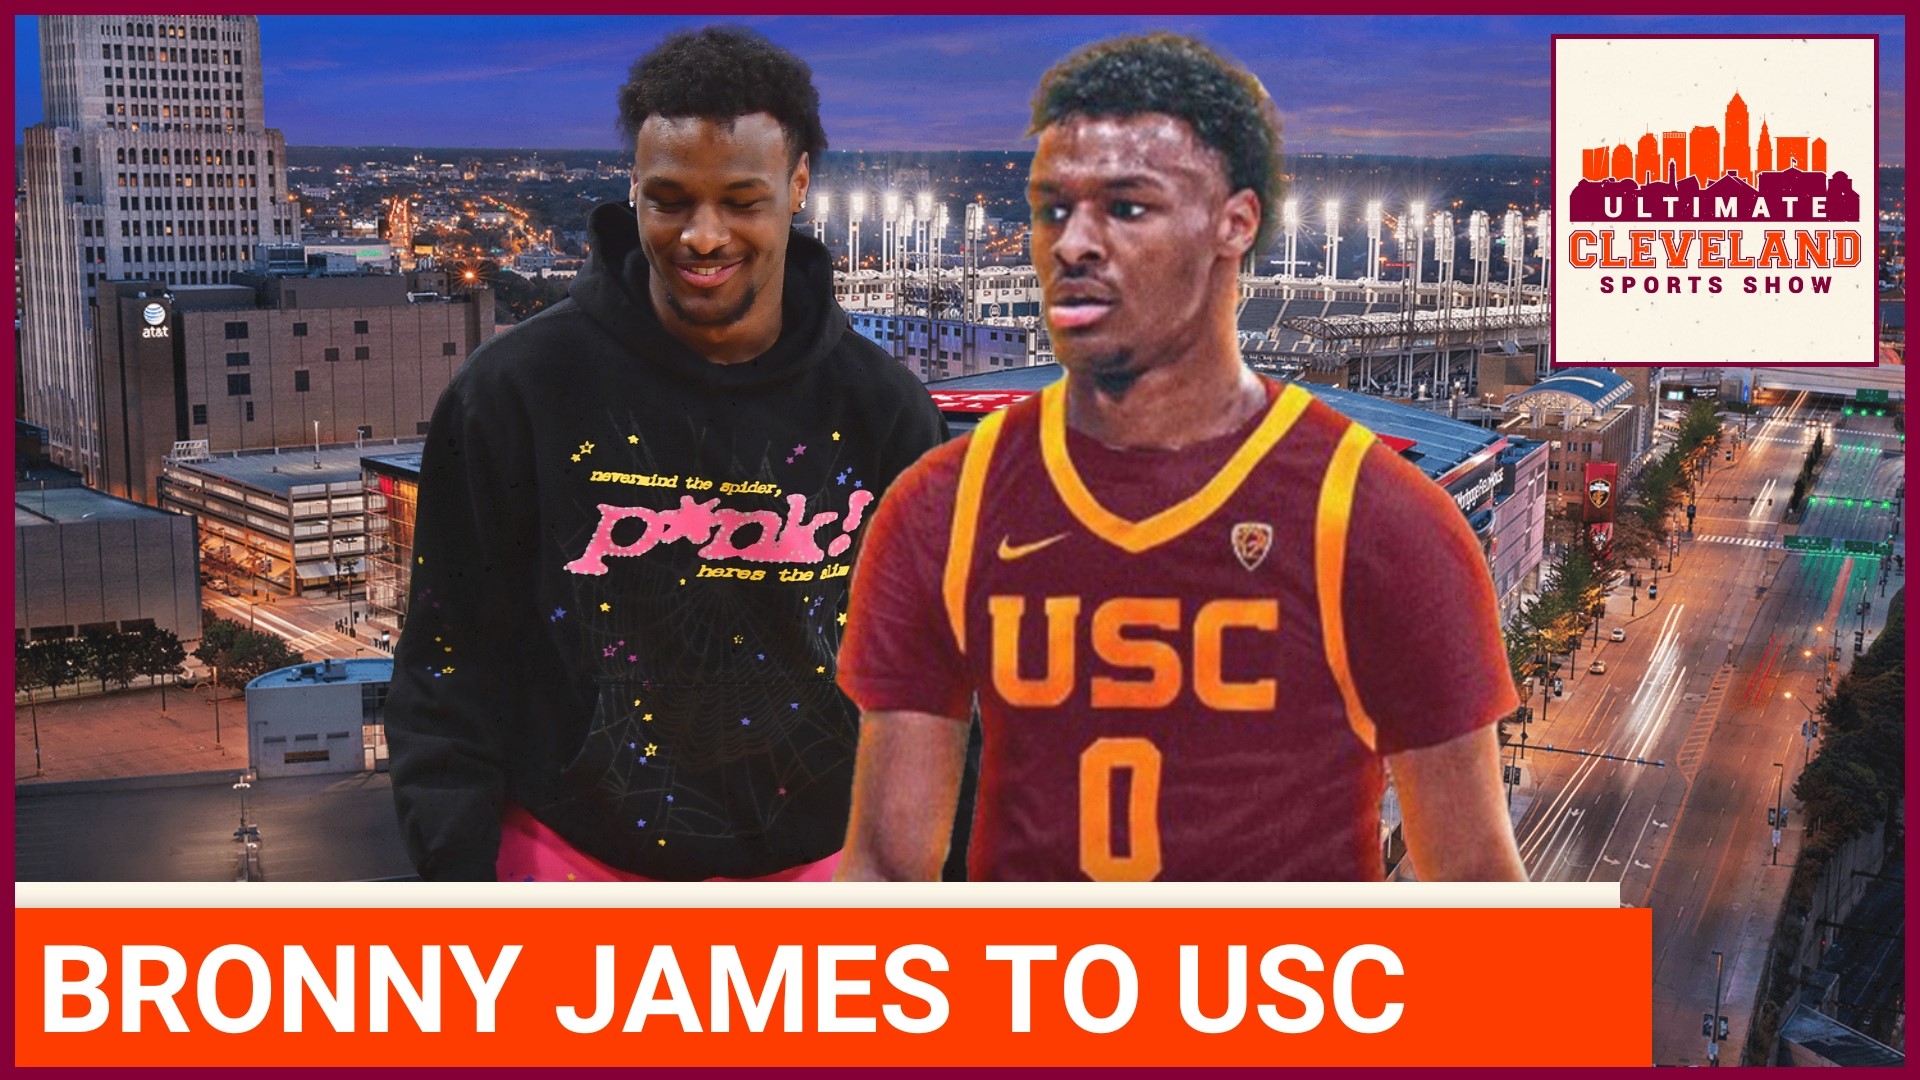 How close was Ohio State in landing Bronny James, and why did he choose UCS over his home-state, Buckeyes?